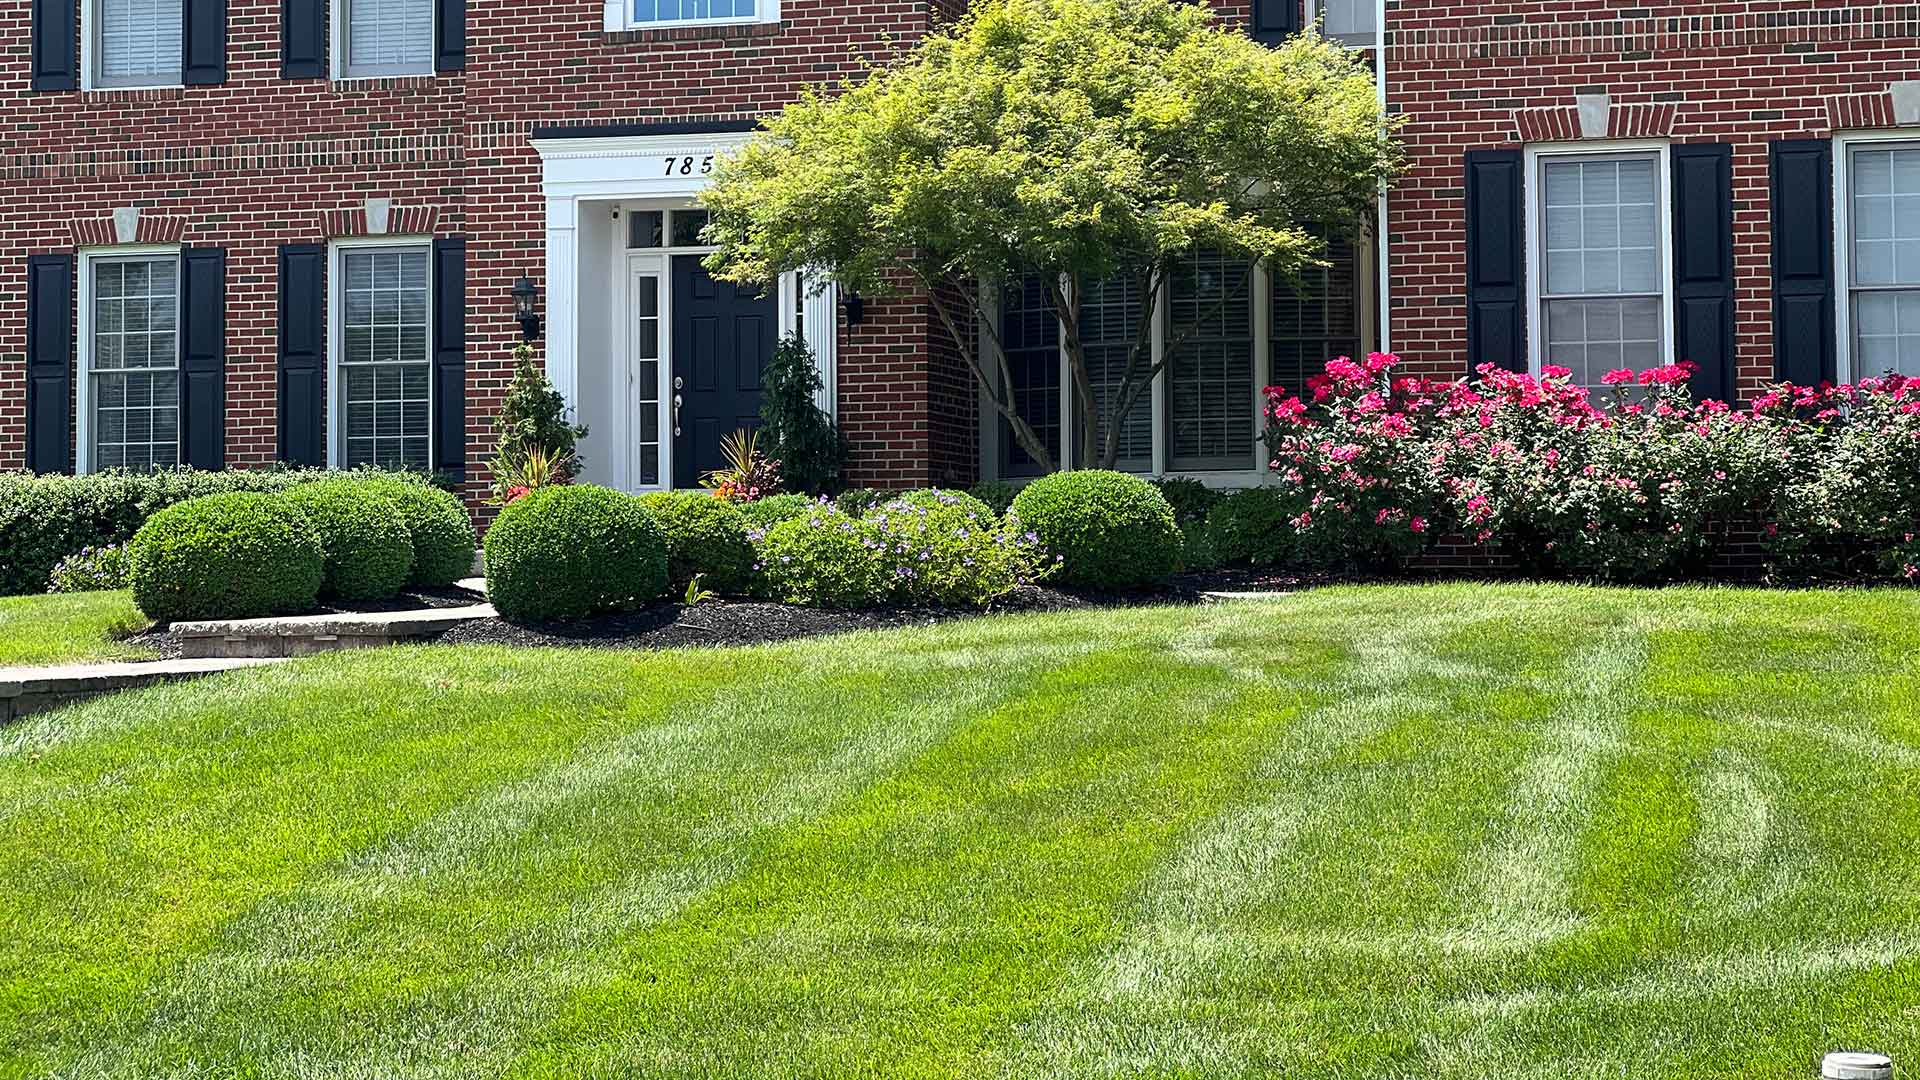 Beautiful brick home in Bensalem, PA with trimmed landscape shrubs and green lawn grass.